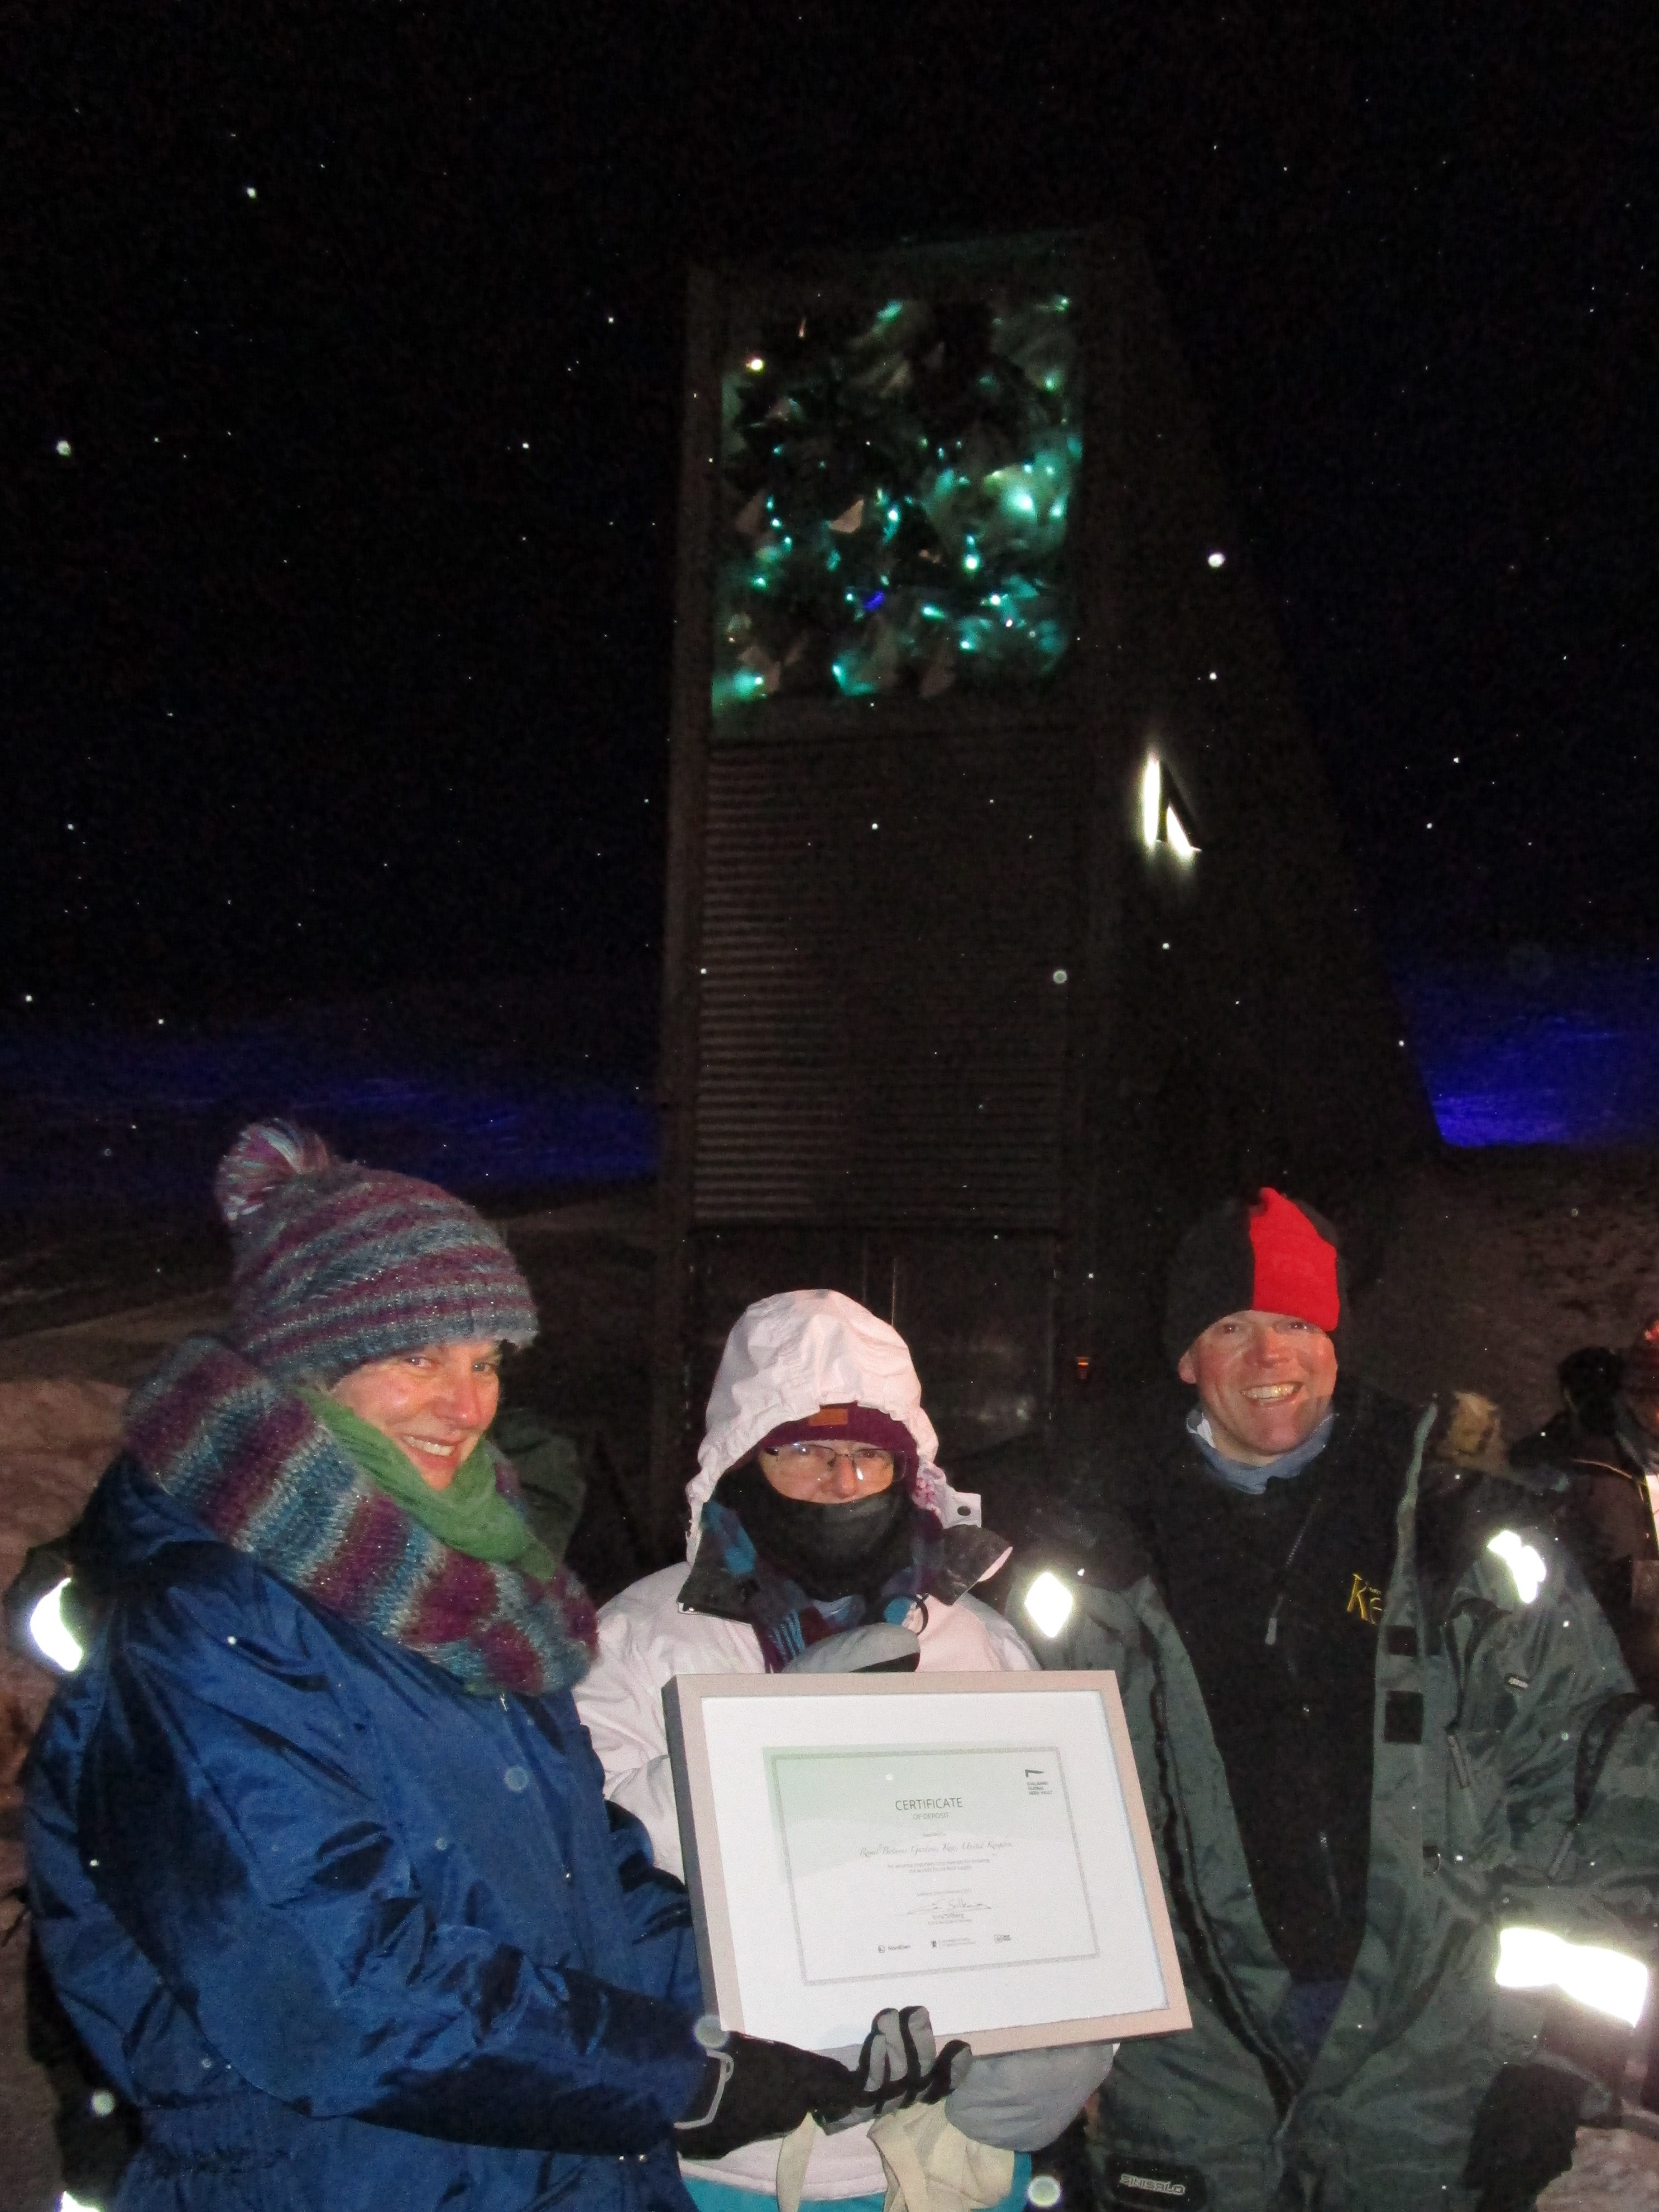 Three people stood holding a framed certificate infront of the Svalbard Global Seed Vault.